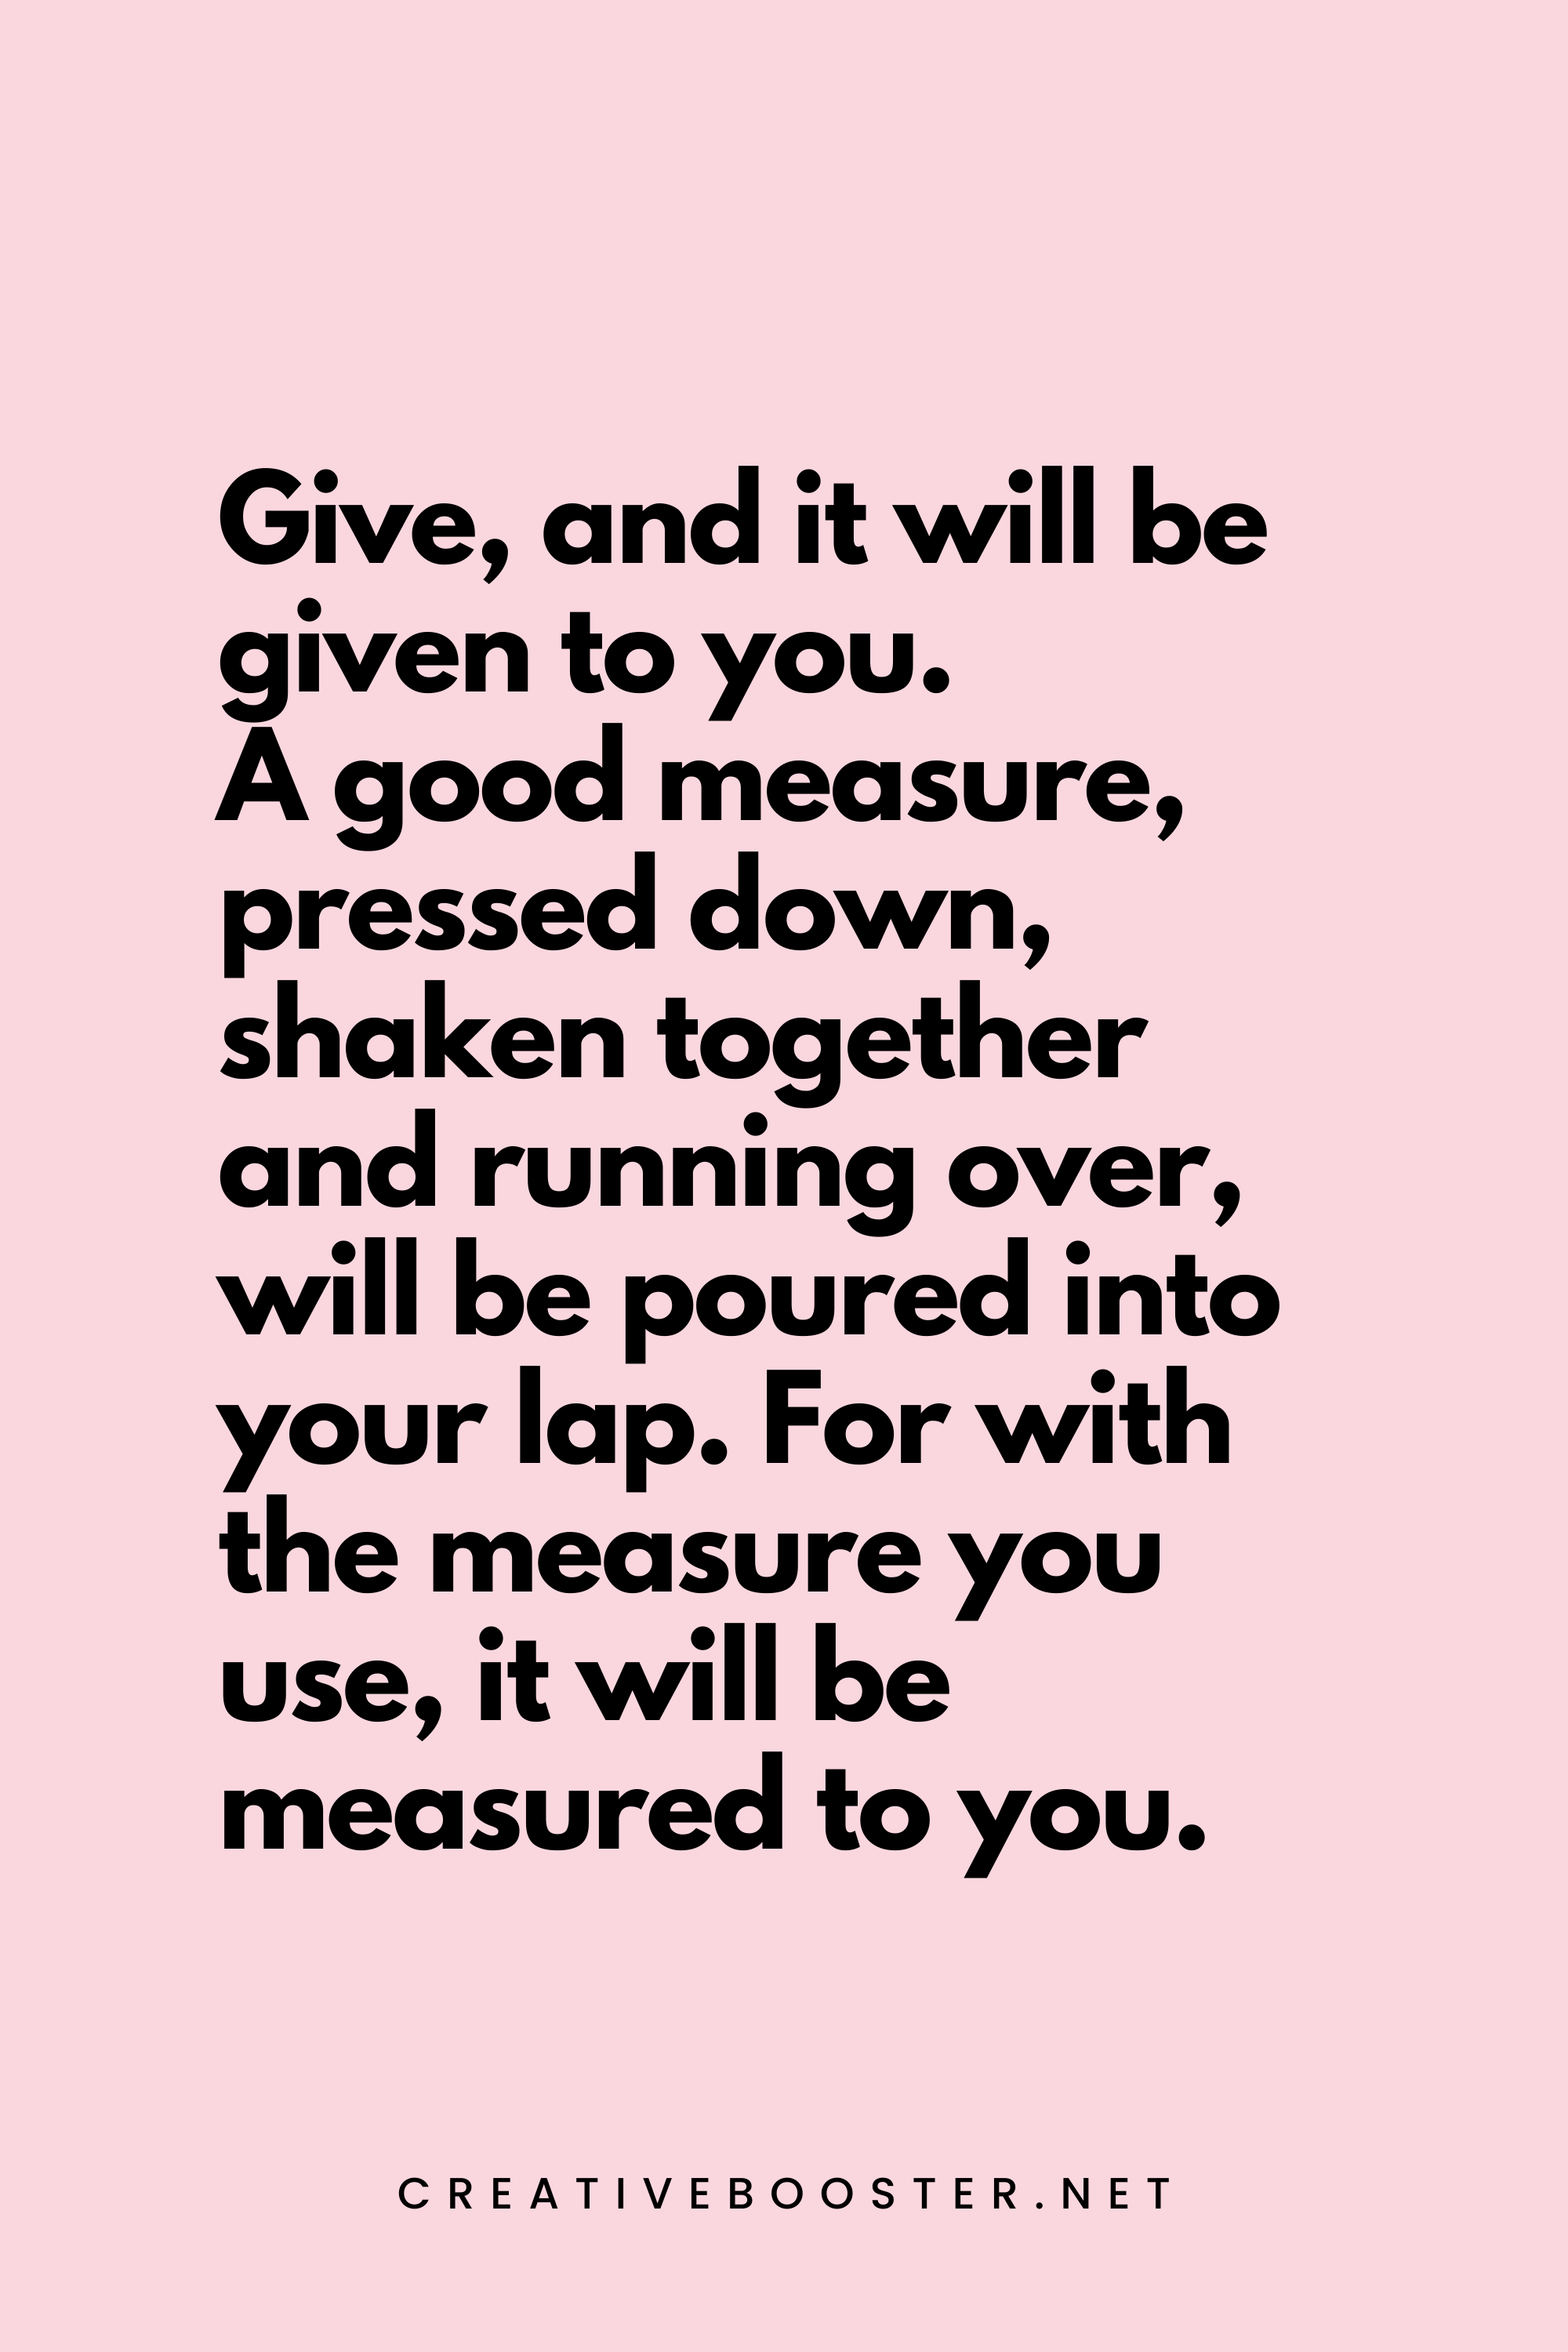 55. Give, and it will be given to you. A good measure, pressed down, shaken together and running over, will be poured into your lap. For with the measure you use, it will be measured to you. - Luke 6:38 - 5.